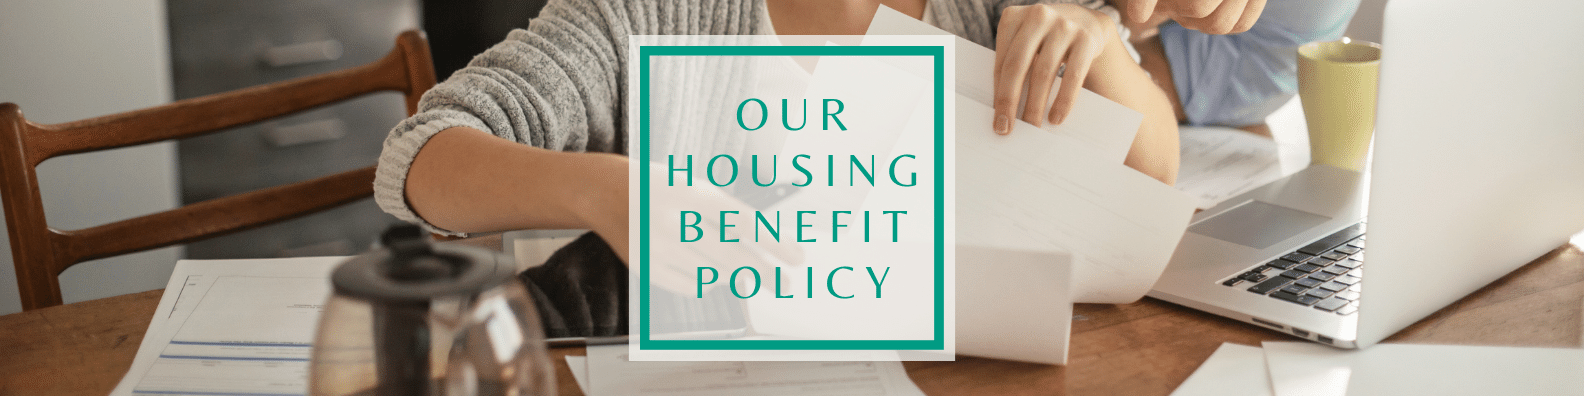 housing benefit policy